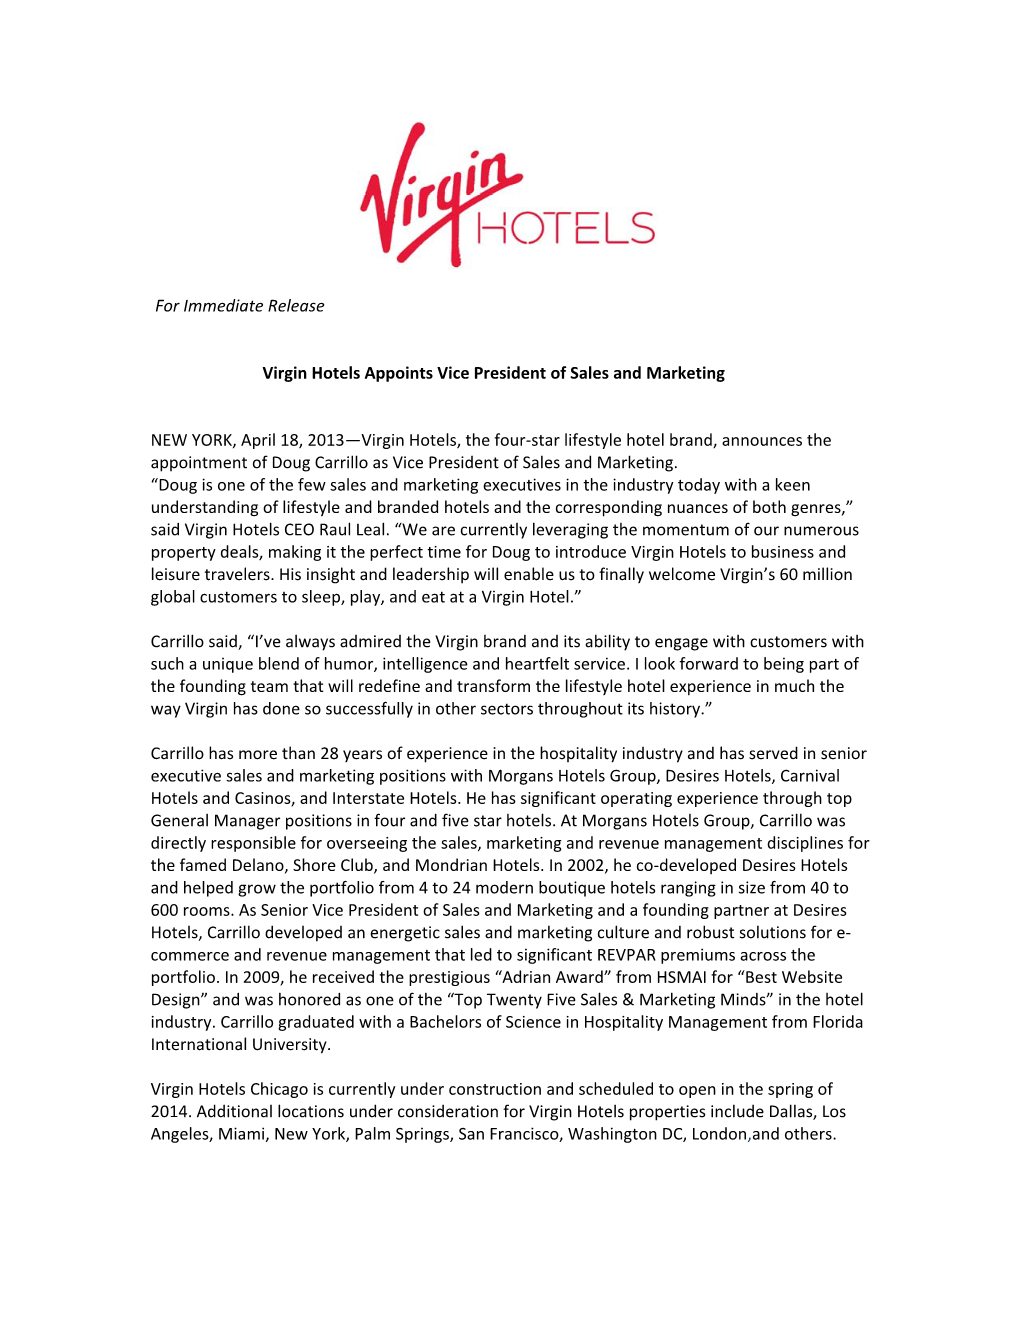 For Immediate Release Virgin Hotels Appoints Vice President of Sales